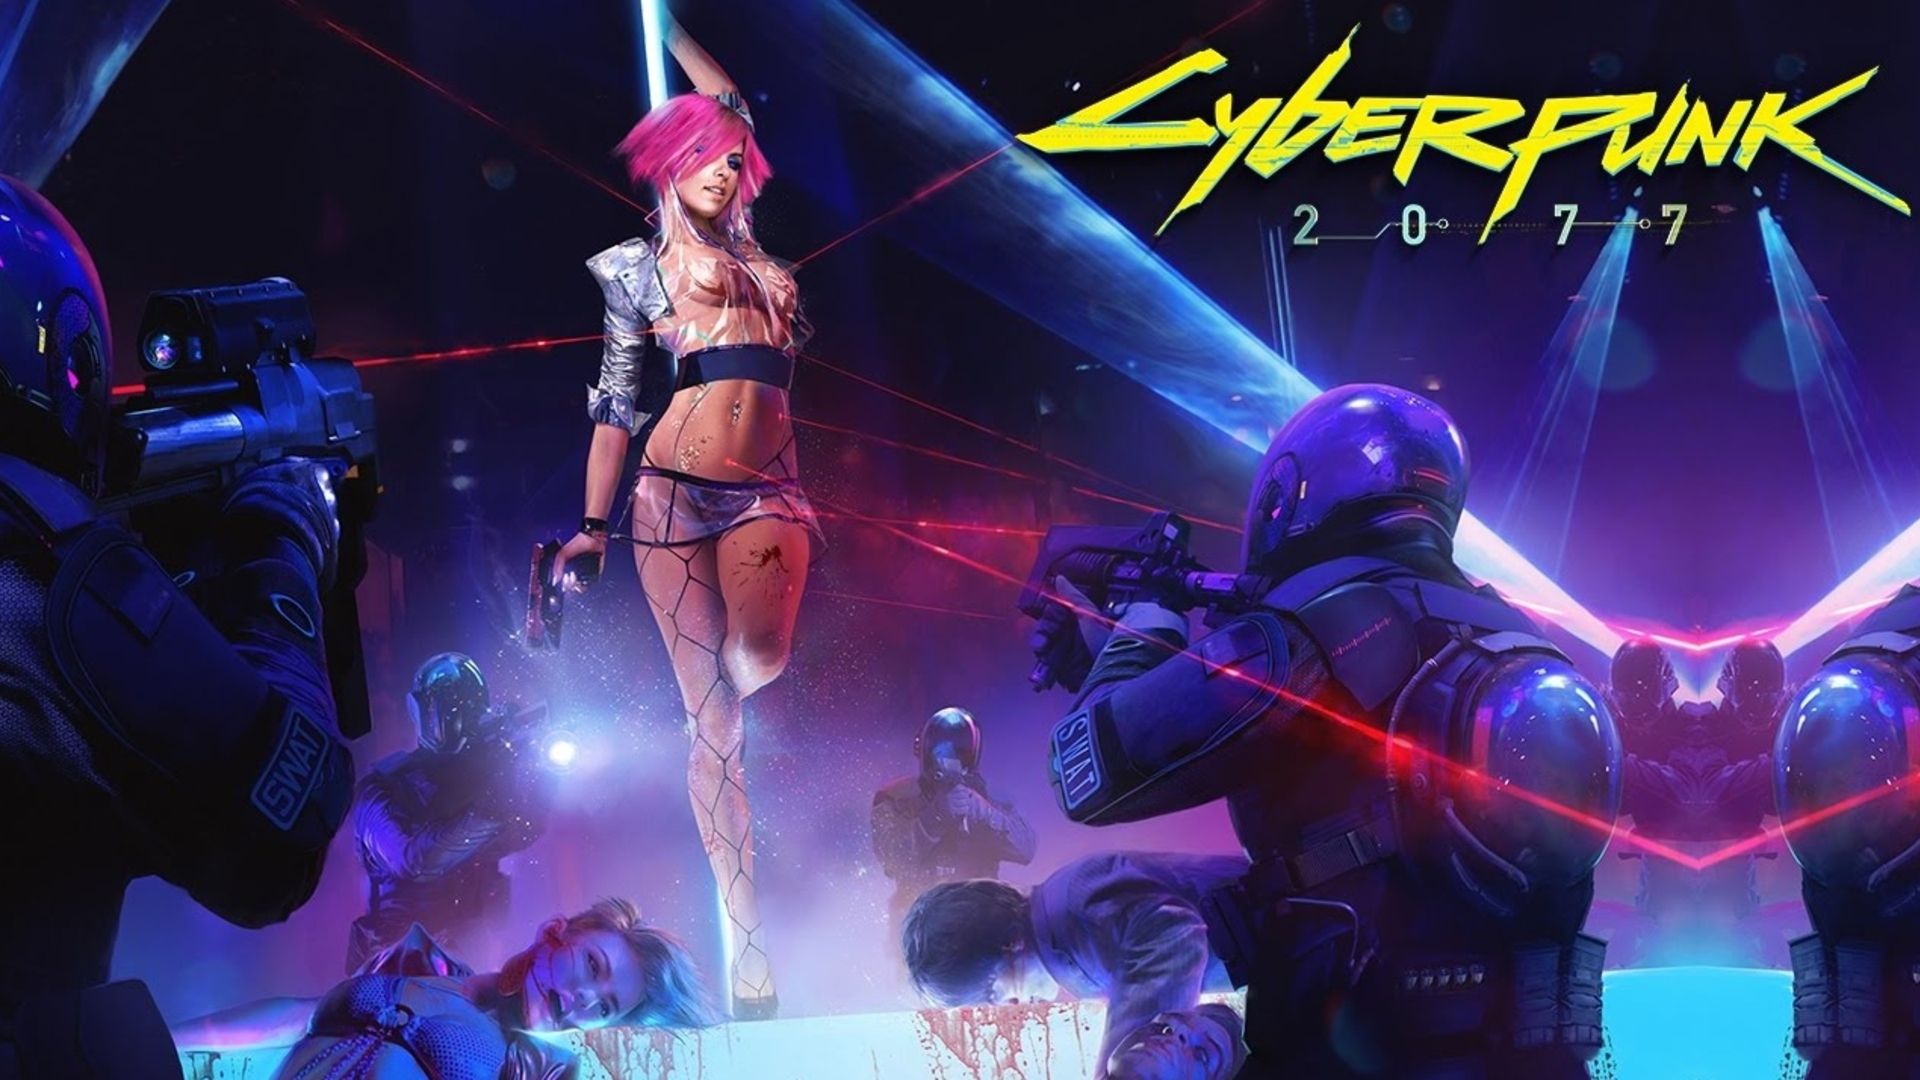 540+ Cyberpunk 2077 HD Wallpapers and Backgrounds